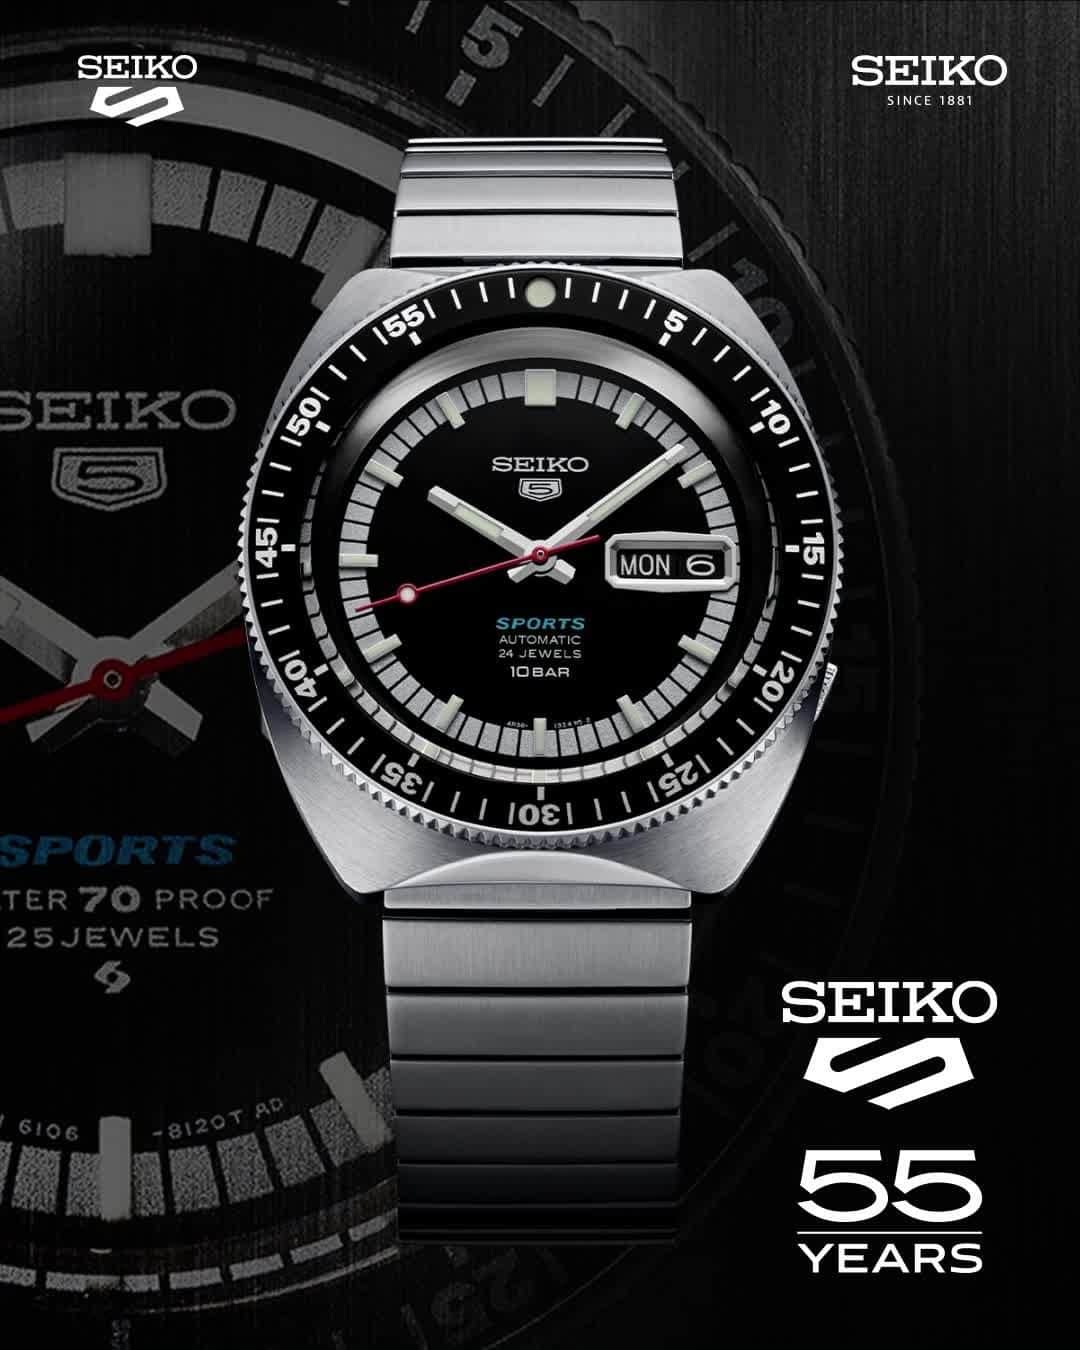 Seiko Watchesのインスタグラム：「#ShowYourStyle in this Seiko 5 Sports 1968 "61-5D" recreation! This elite timepiece crisply displays a black dial with the original Seiko 5 logo and the word "SPORTS" at 6 o'clock. Keep your look classic and keep your timepiece Seiko. ⚫  #SRPK17 #Seiko #Seiko5Sports」